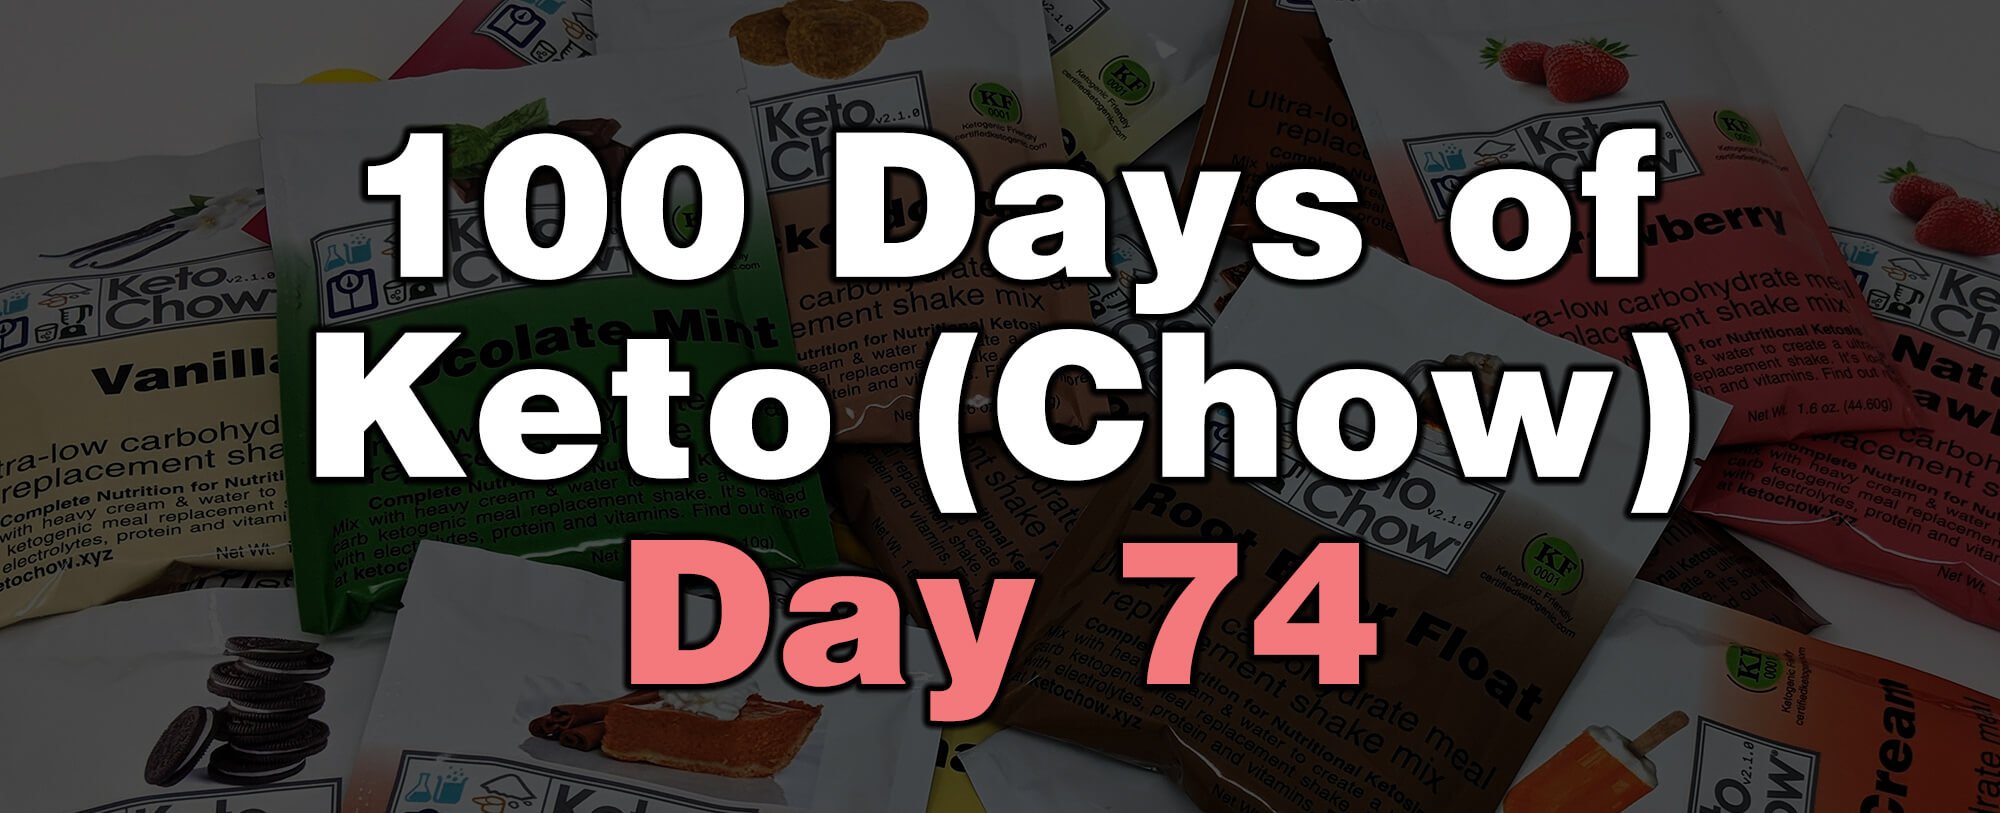 100 days of keto chow day 74